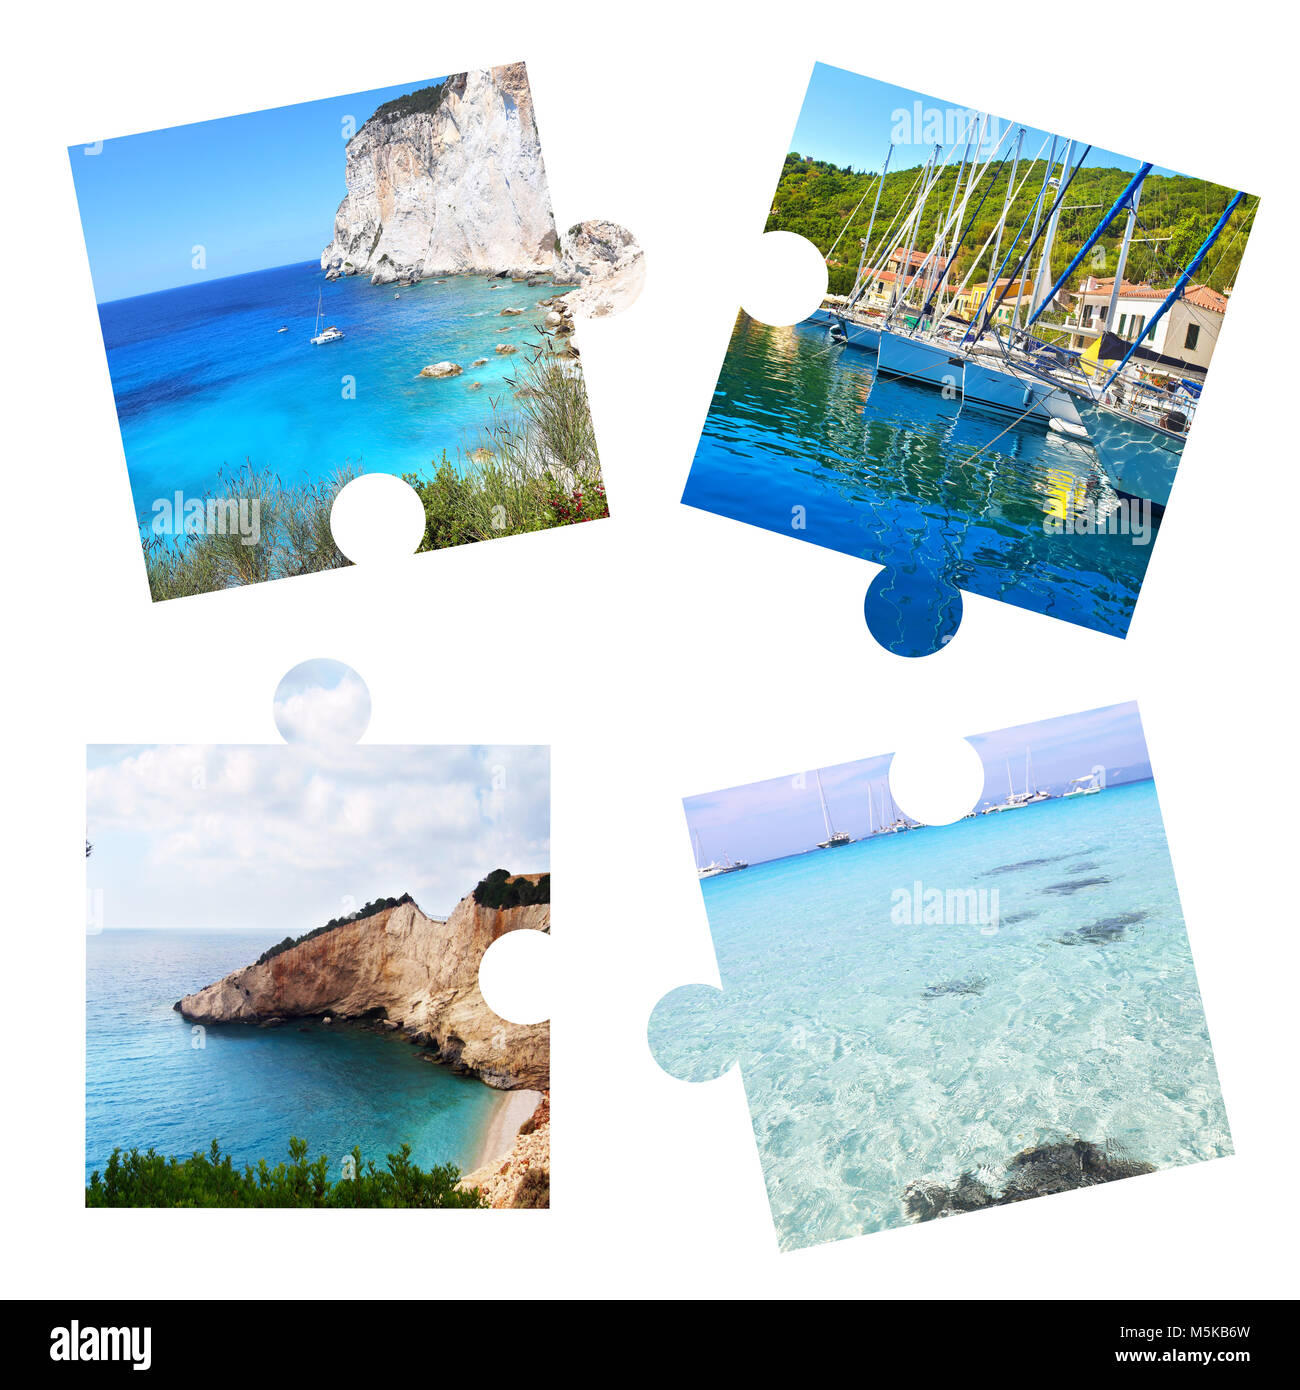 photo collage with Ionian islands in puzzle pieces - Paxos, Ithaca, Lefkada, Antipaxos islands Stock Photo